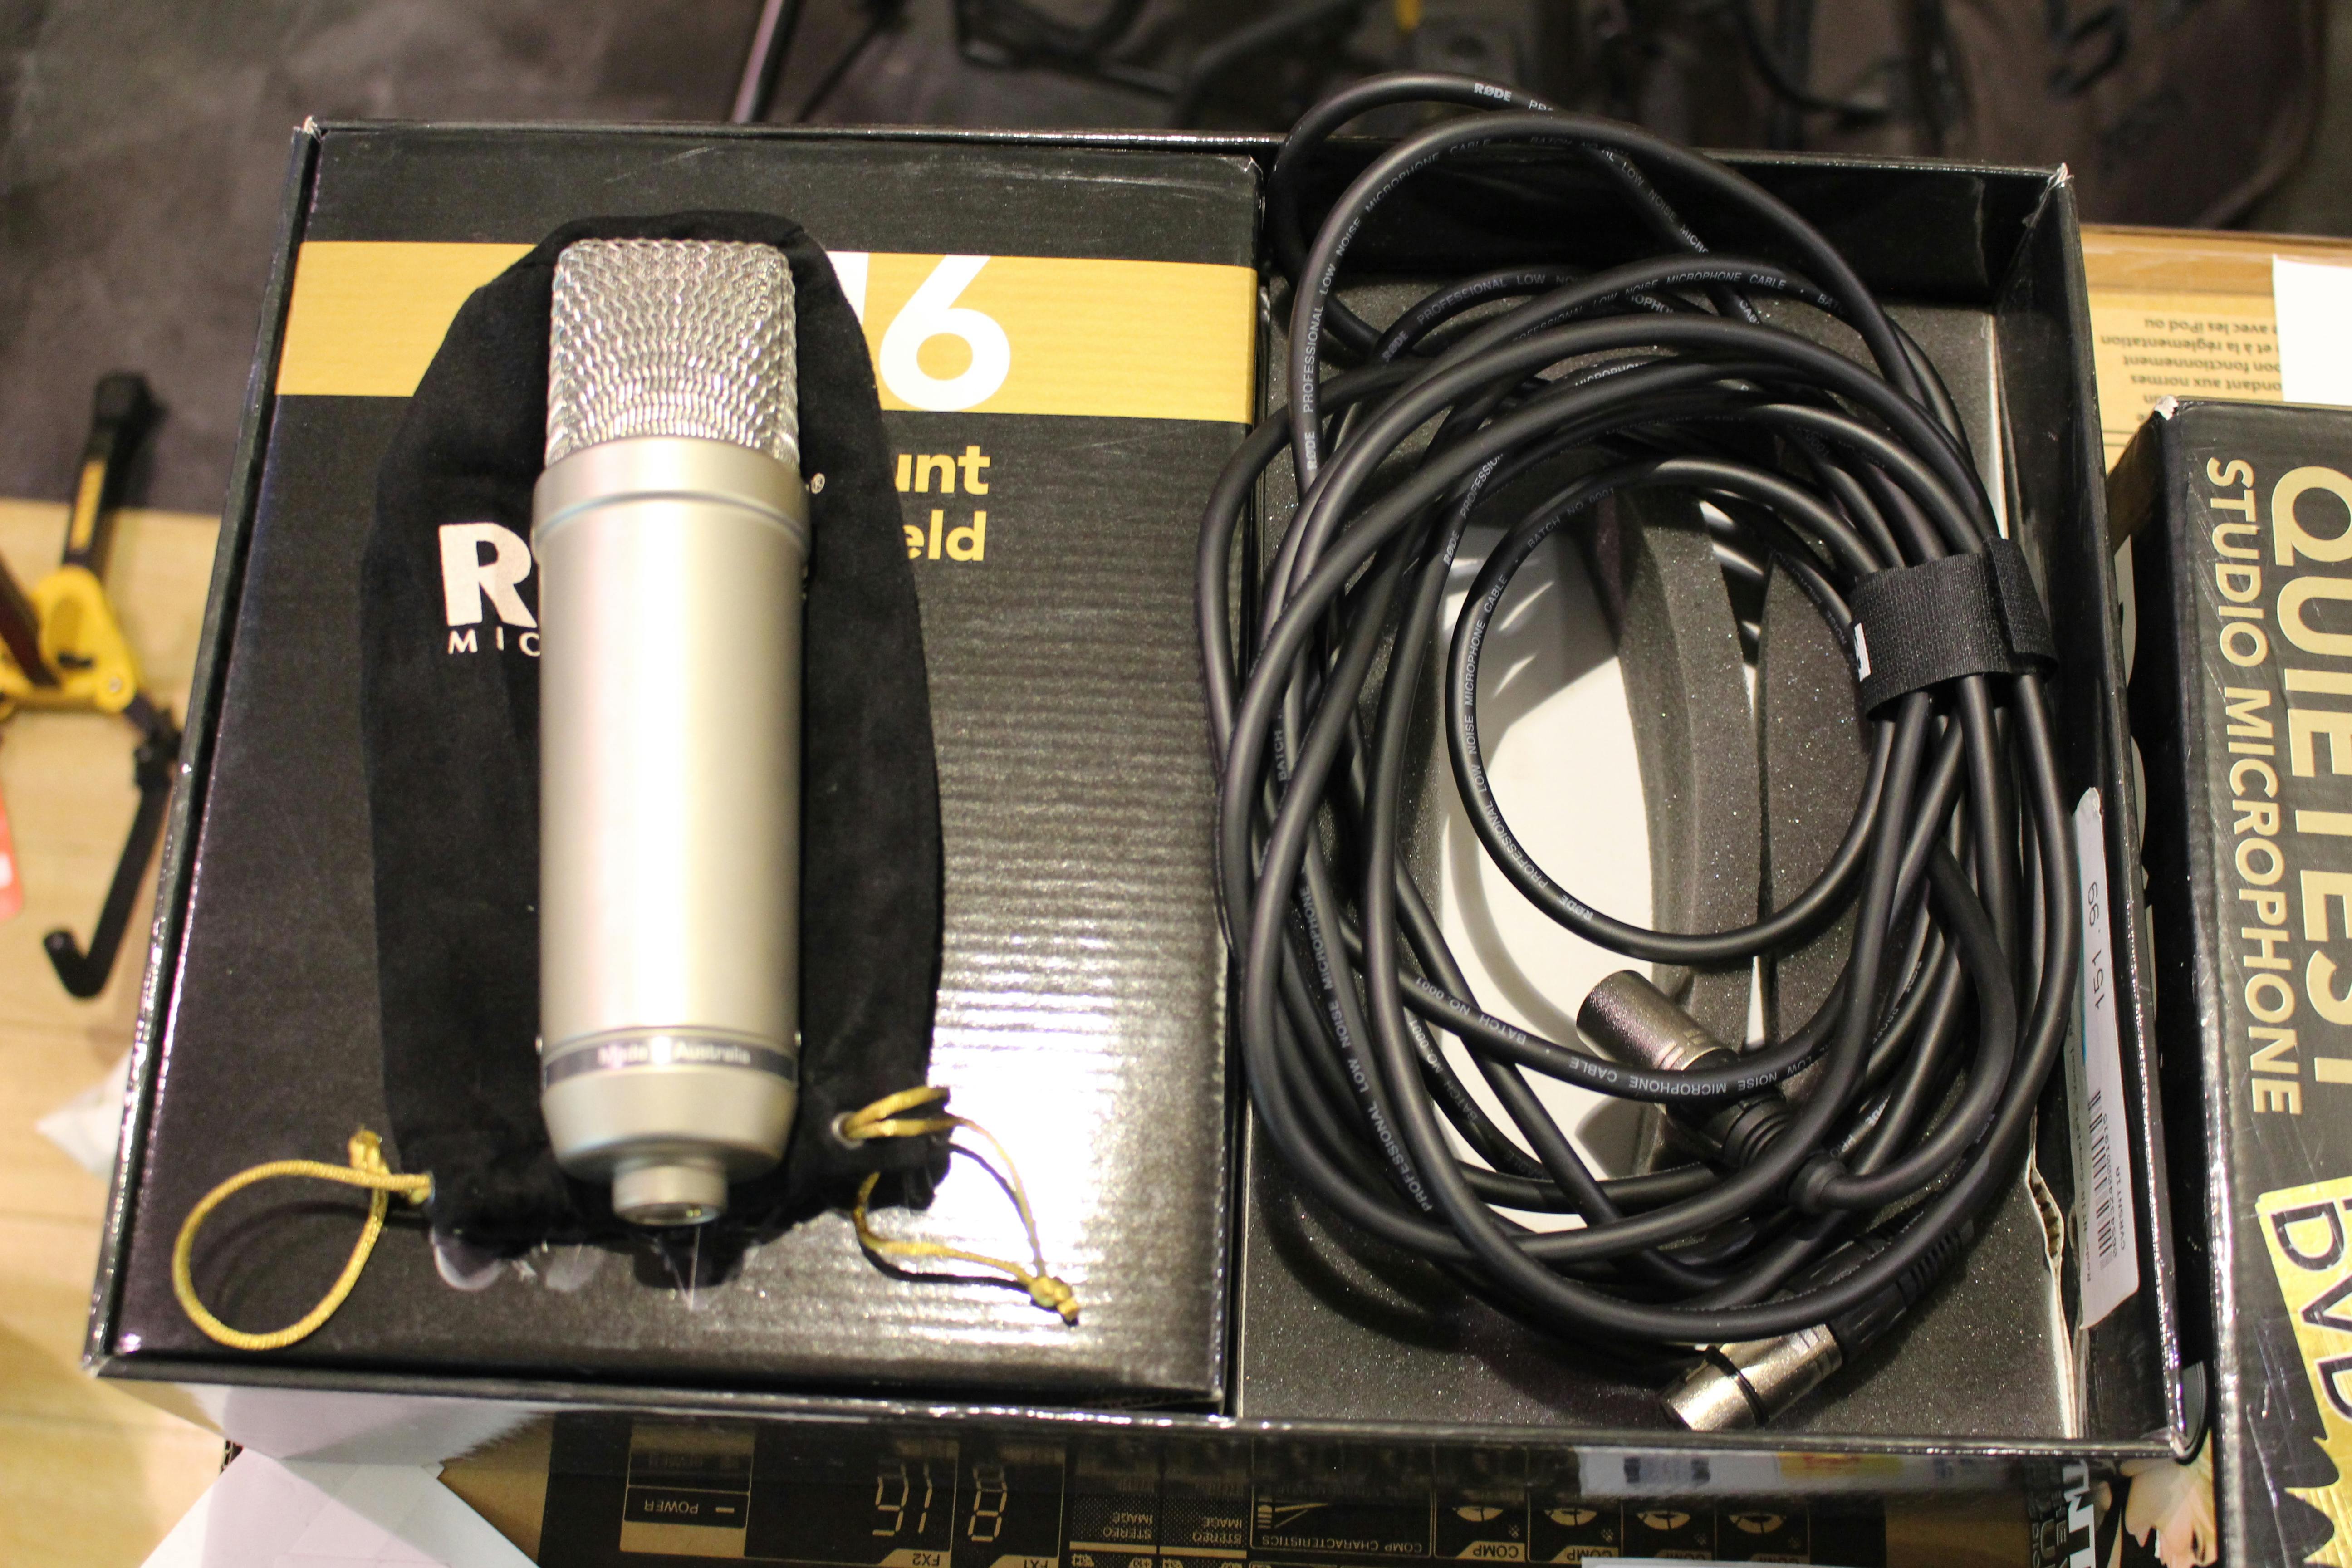 Rode NT1A Review  Read This Before Buying This Condenser Mic!